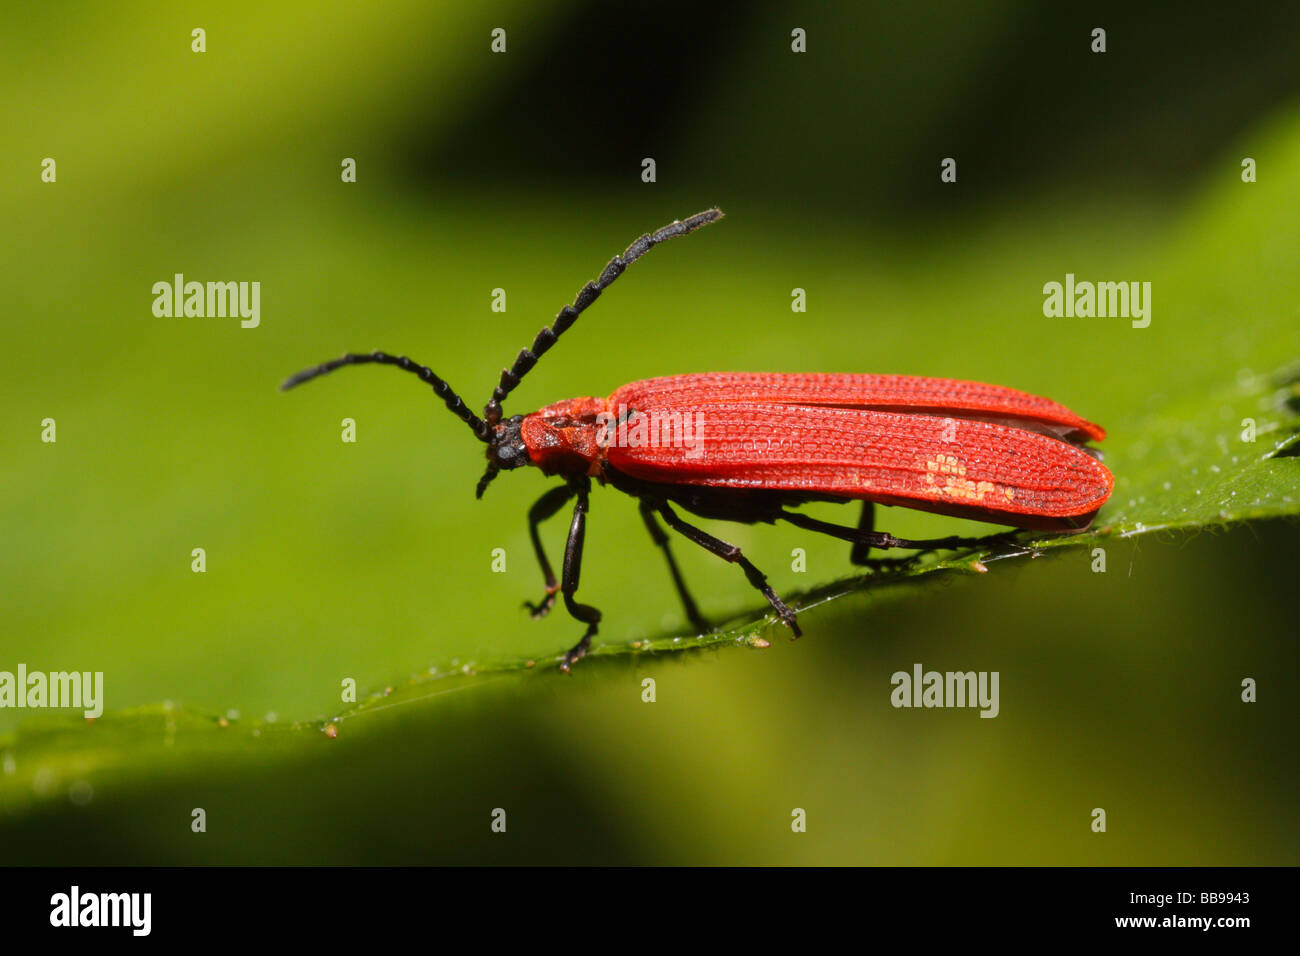 Dictyoptera aurora, a net-winged beetle Stock Photo